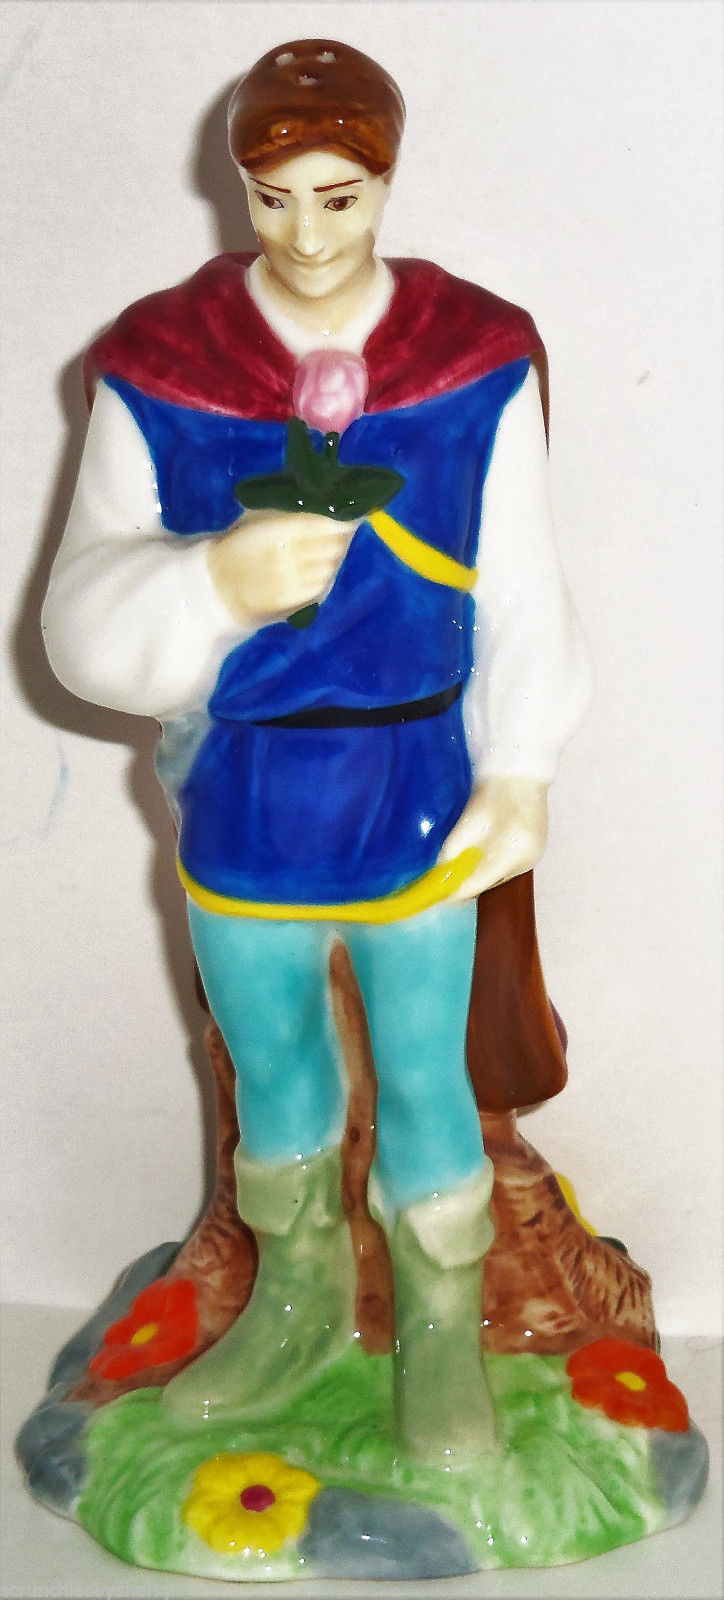 Primary image for Disney Snow White The Prince Shaker Ceramic Limited Edition Signed 2005